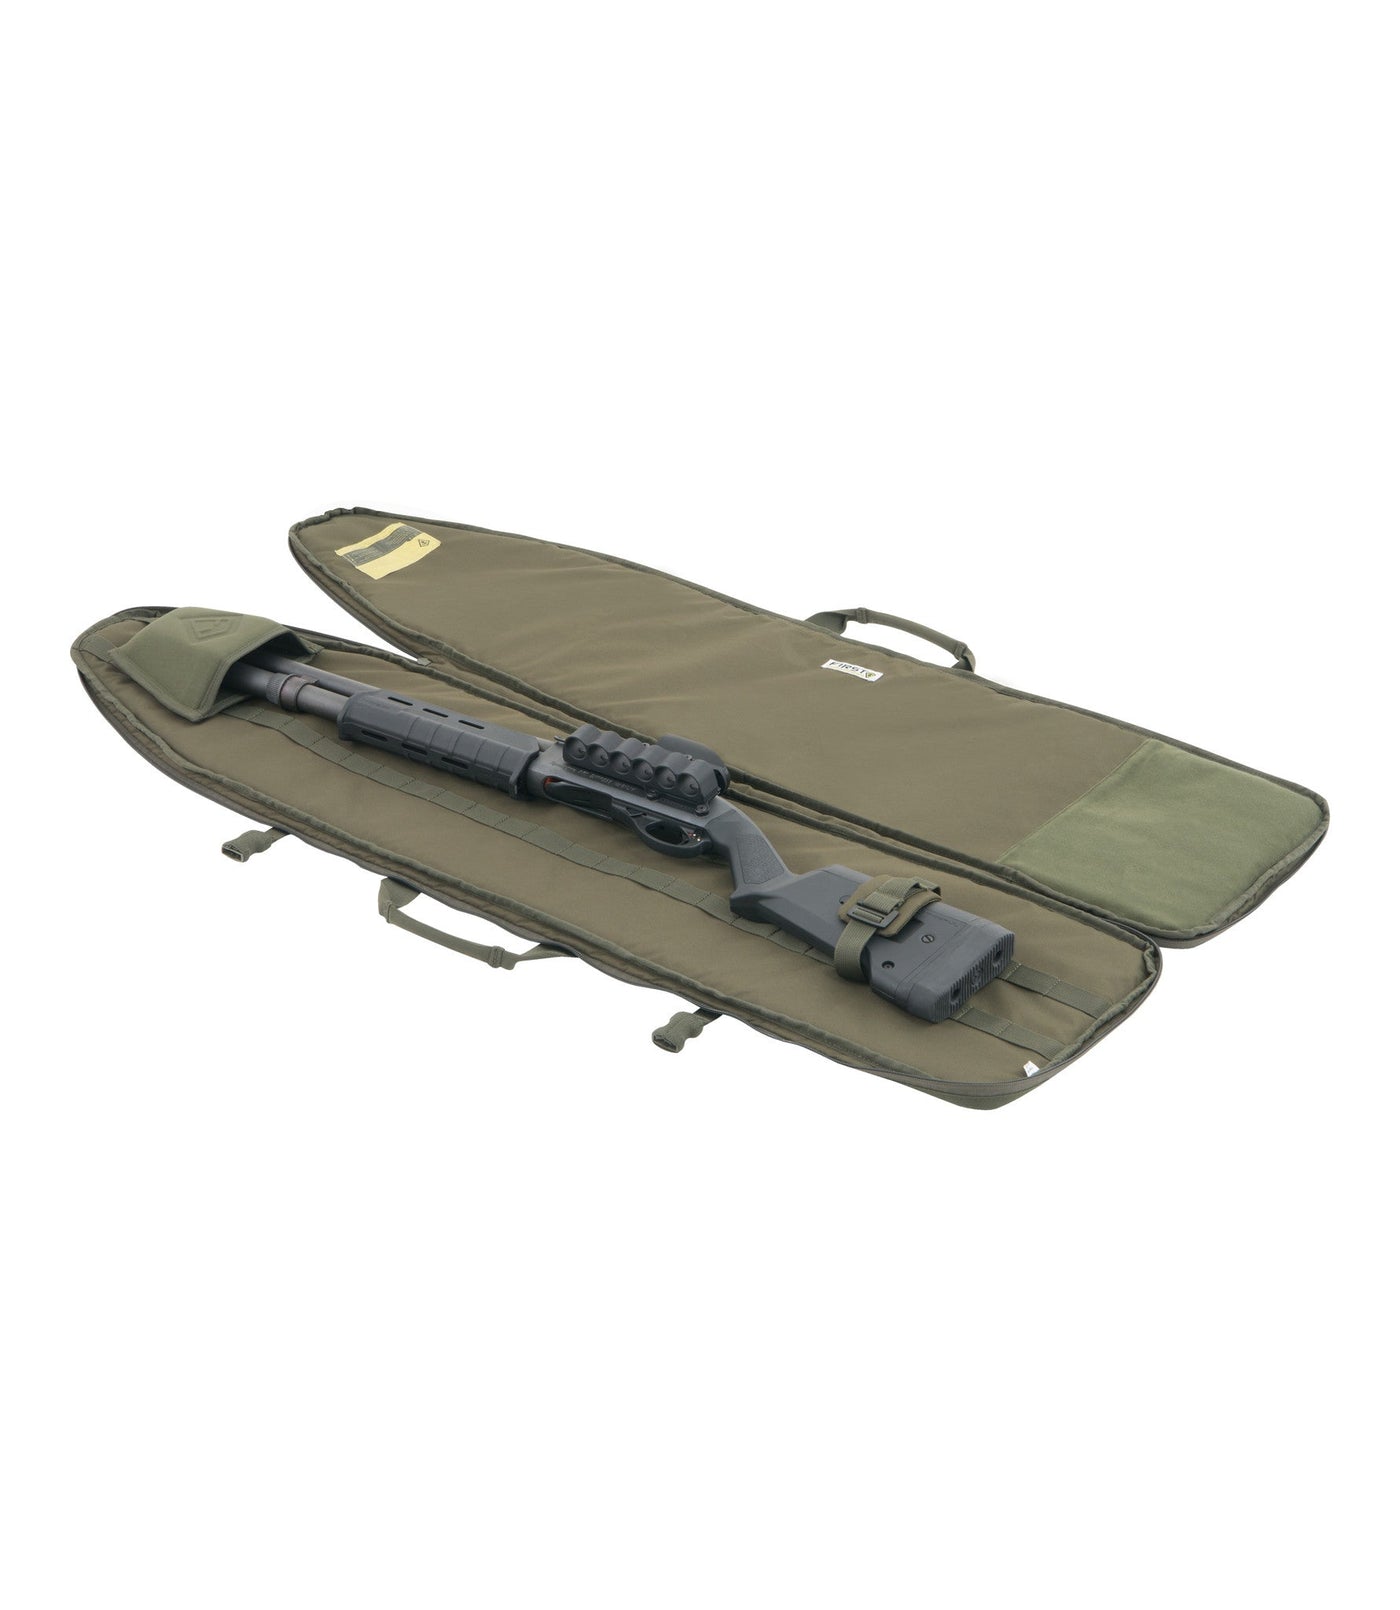 Rifle Sleeve 42 Inch in OD Green Open with Gun